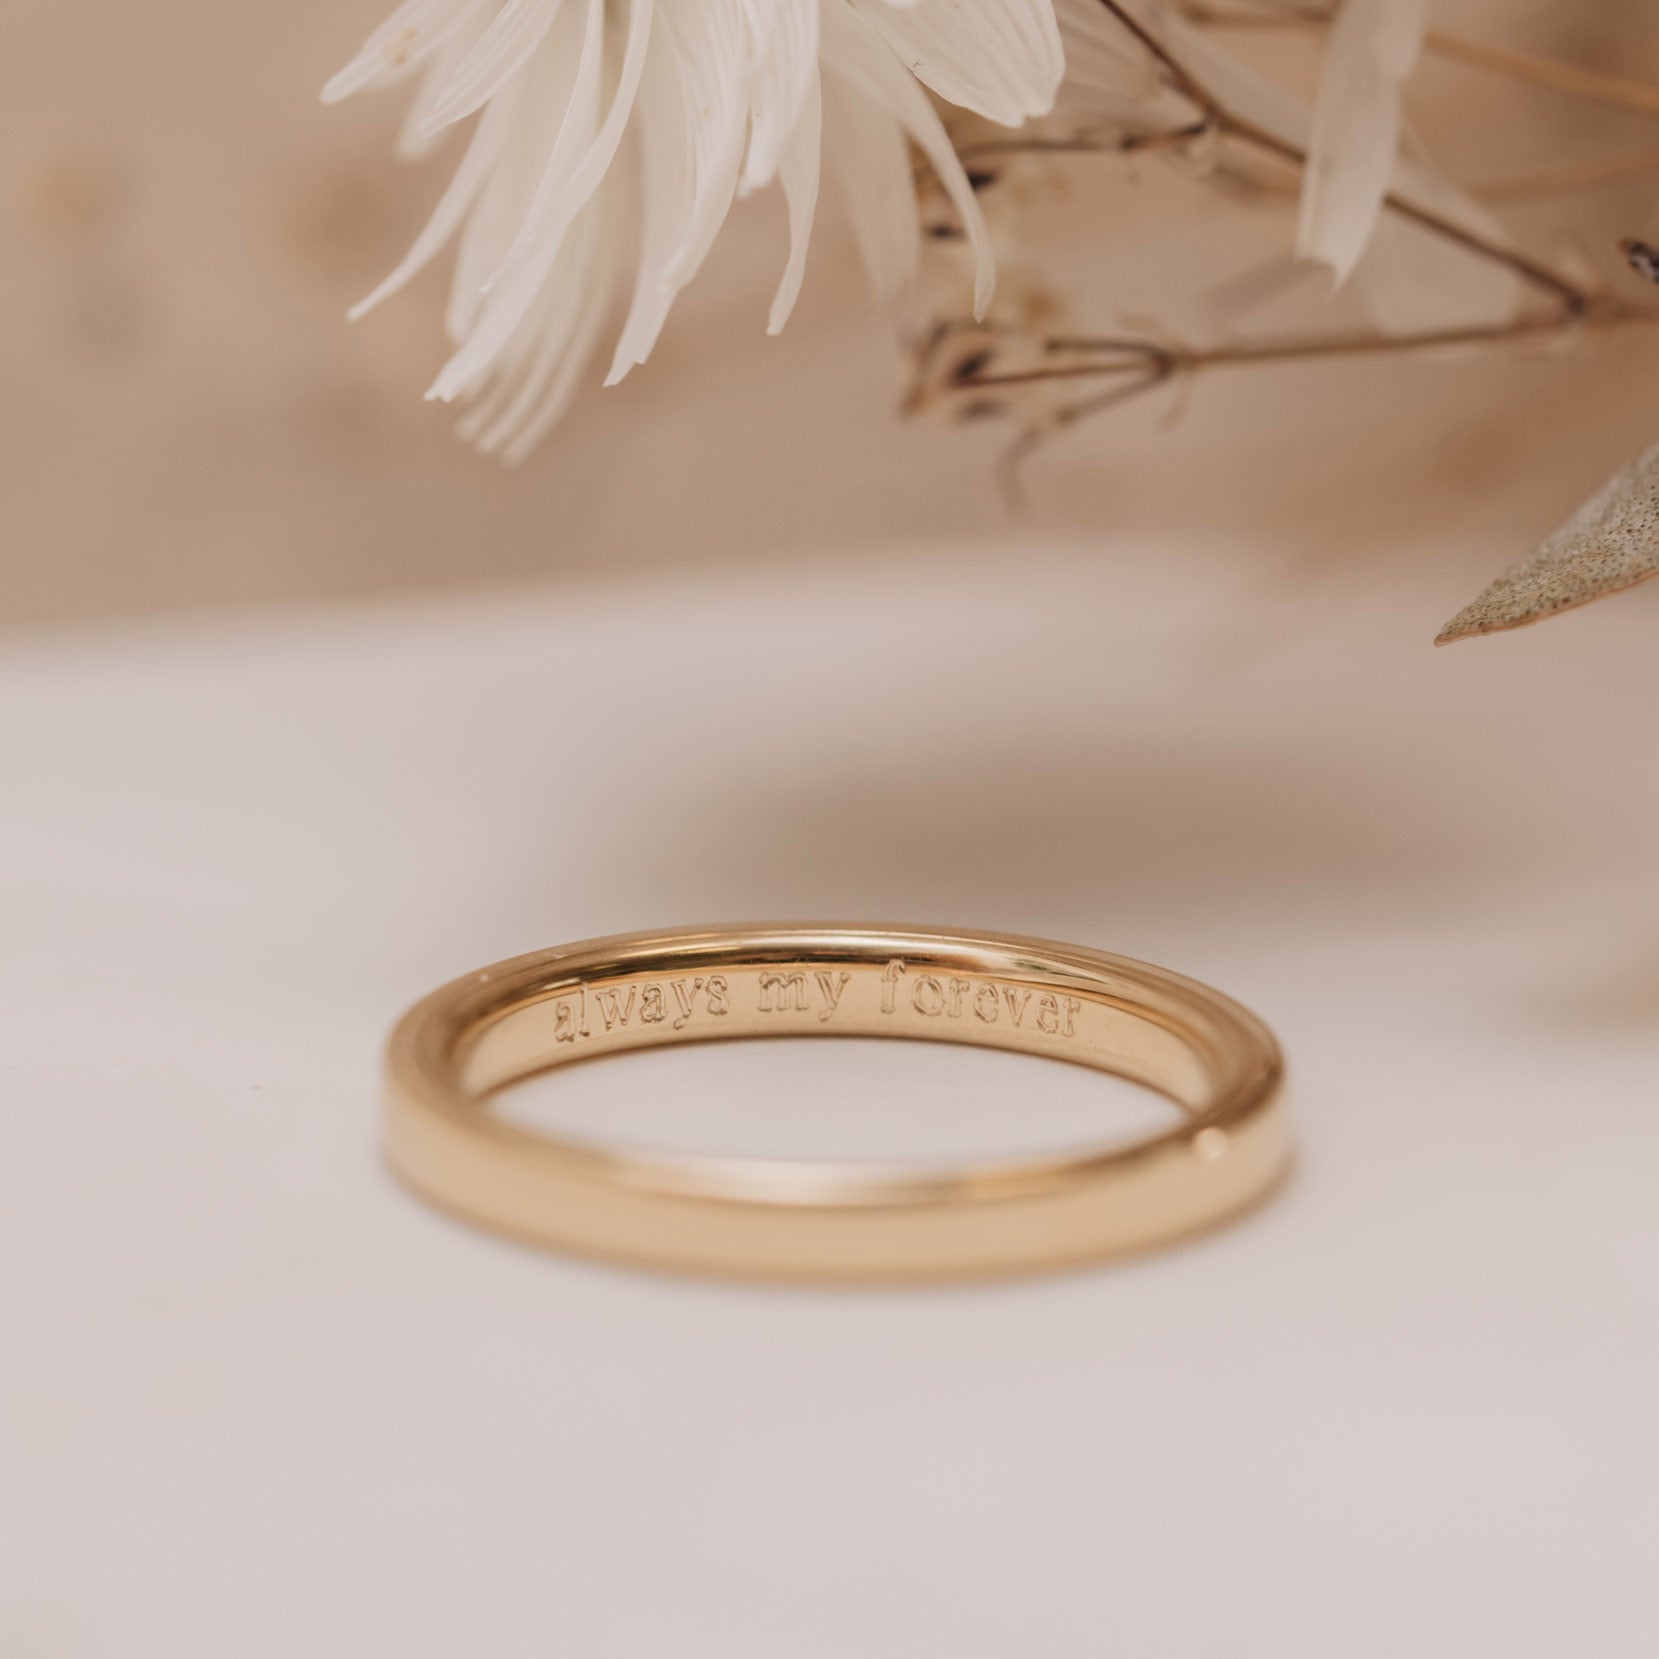 Photograph of plain gold wedding band with 'Always My Forever' engraved on the inside.